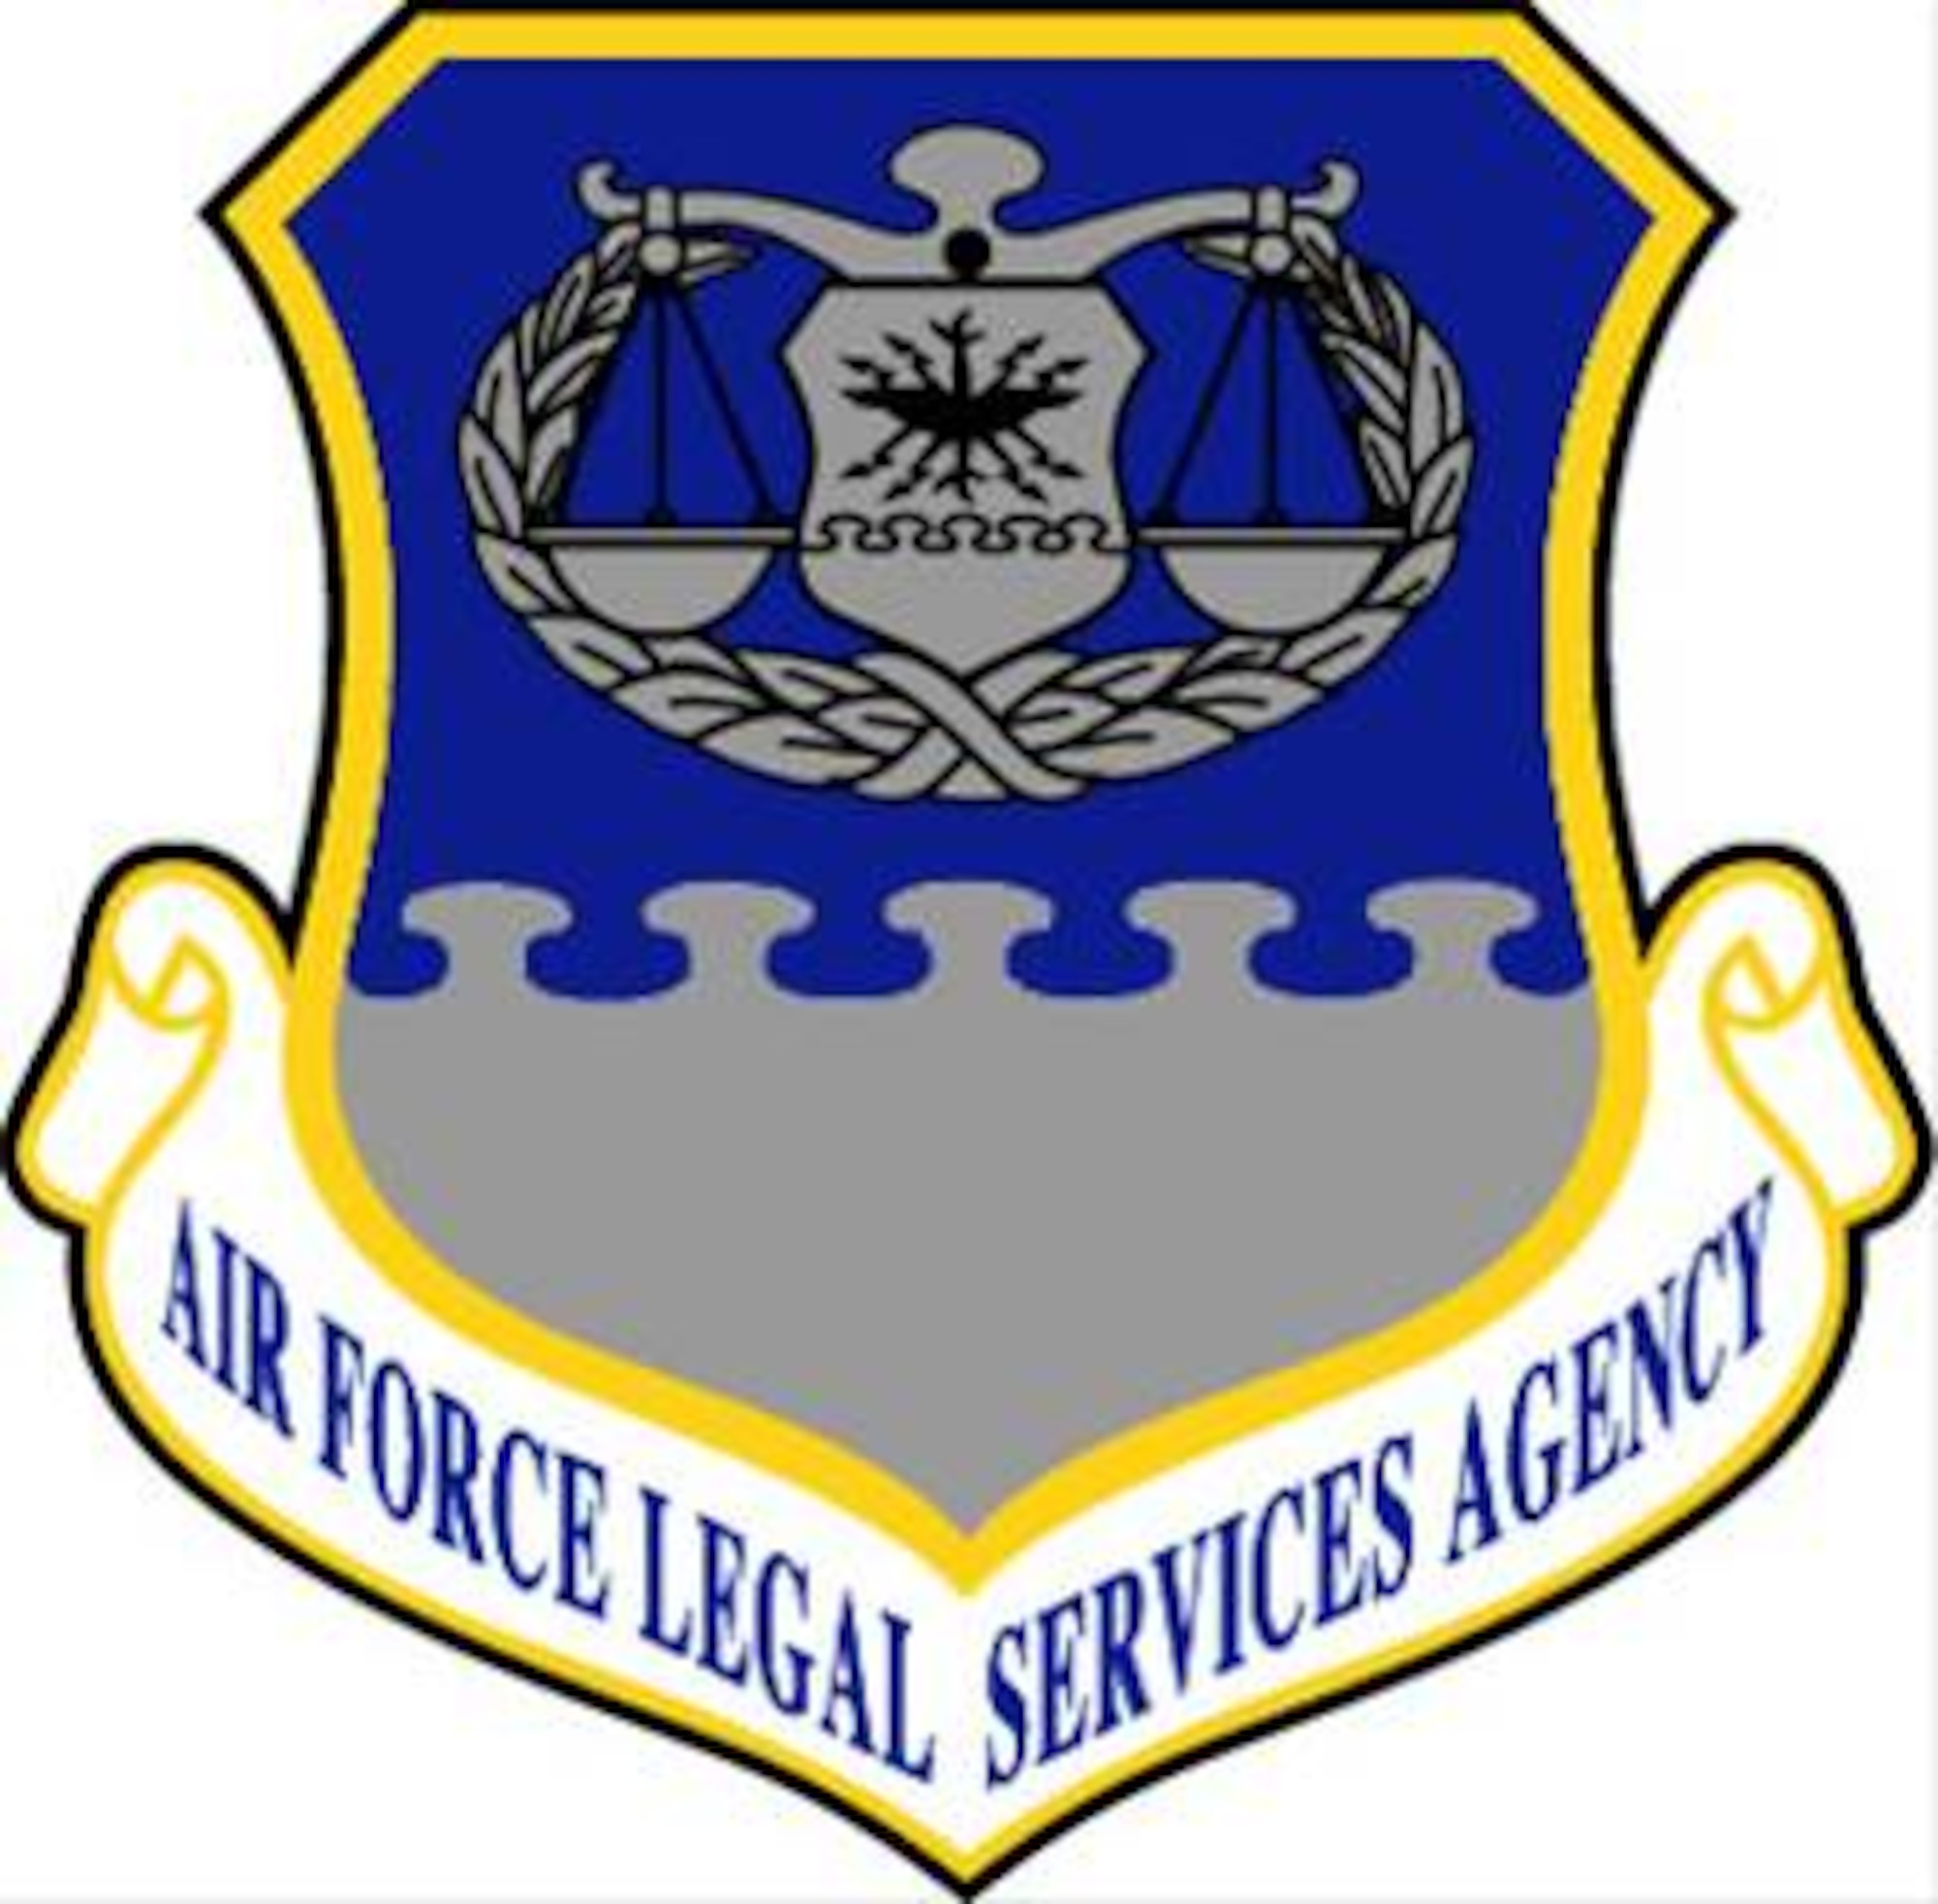 Air Force Legal Services Agency shield -- The Air Force Legal Services Center was renamed the Air Force Legal Services Agency on 1 May 1991 as a result of a reorganization of the The Judge Advocate General's Department (which itself was renamed The Judge Advocate General's Corps in 2003).  U.S. Air Force graphic.  In accordance with Chapter 3 of AFI 84-105, commercial reproduction of this emblem is NOT permitted without the permission of the proponent organizational/unit commander. 